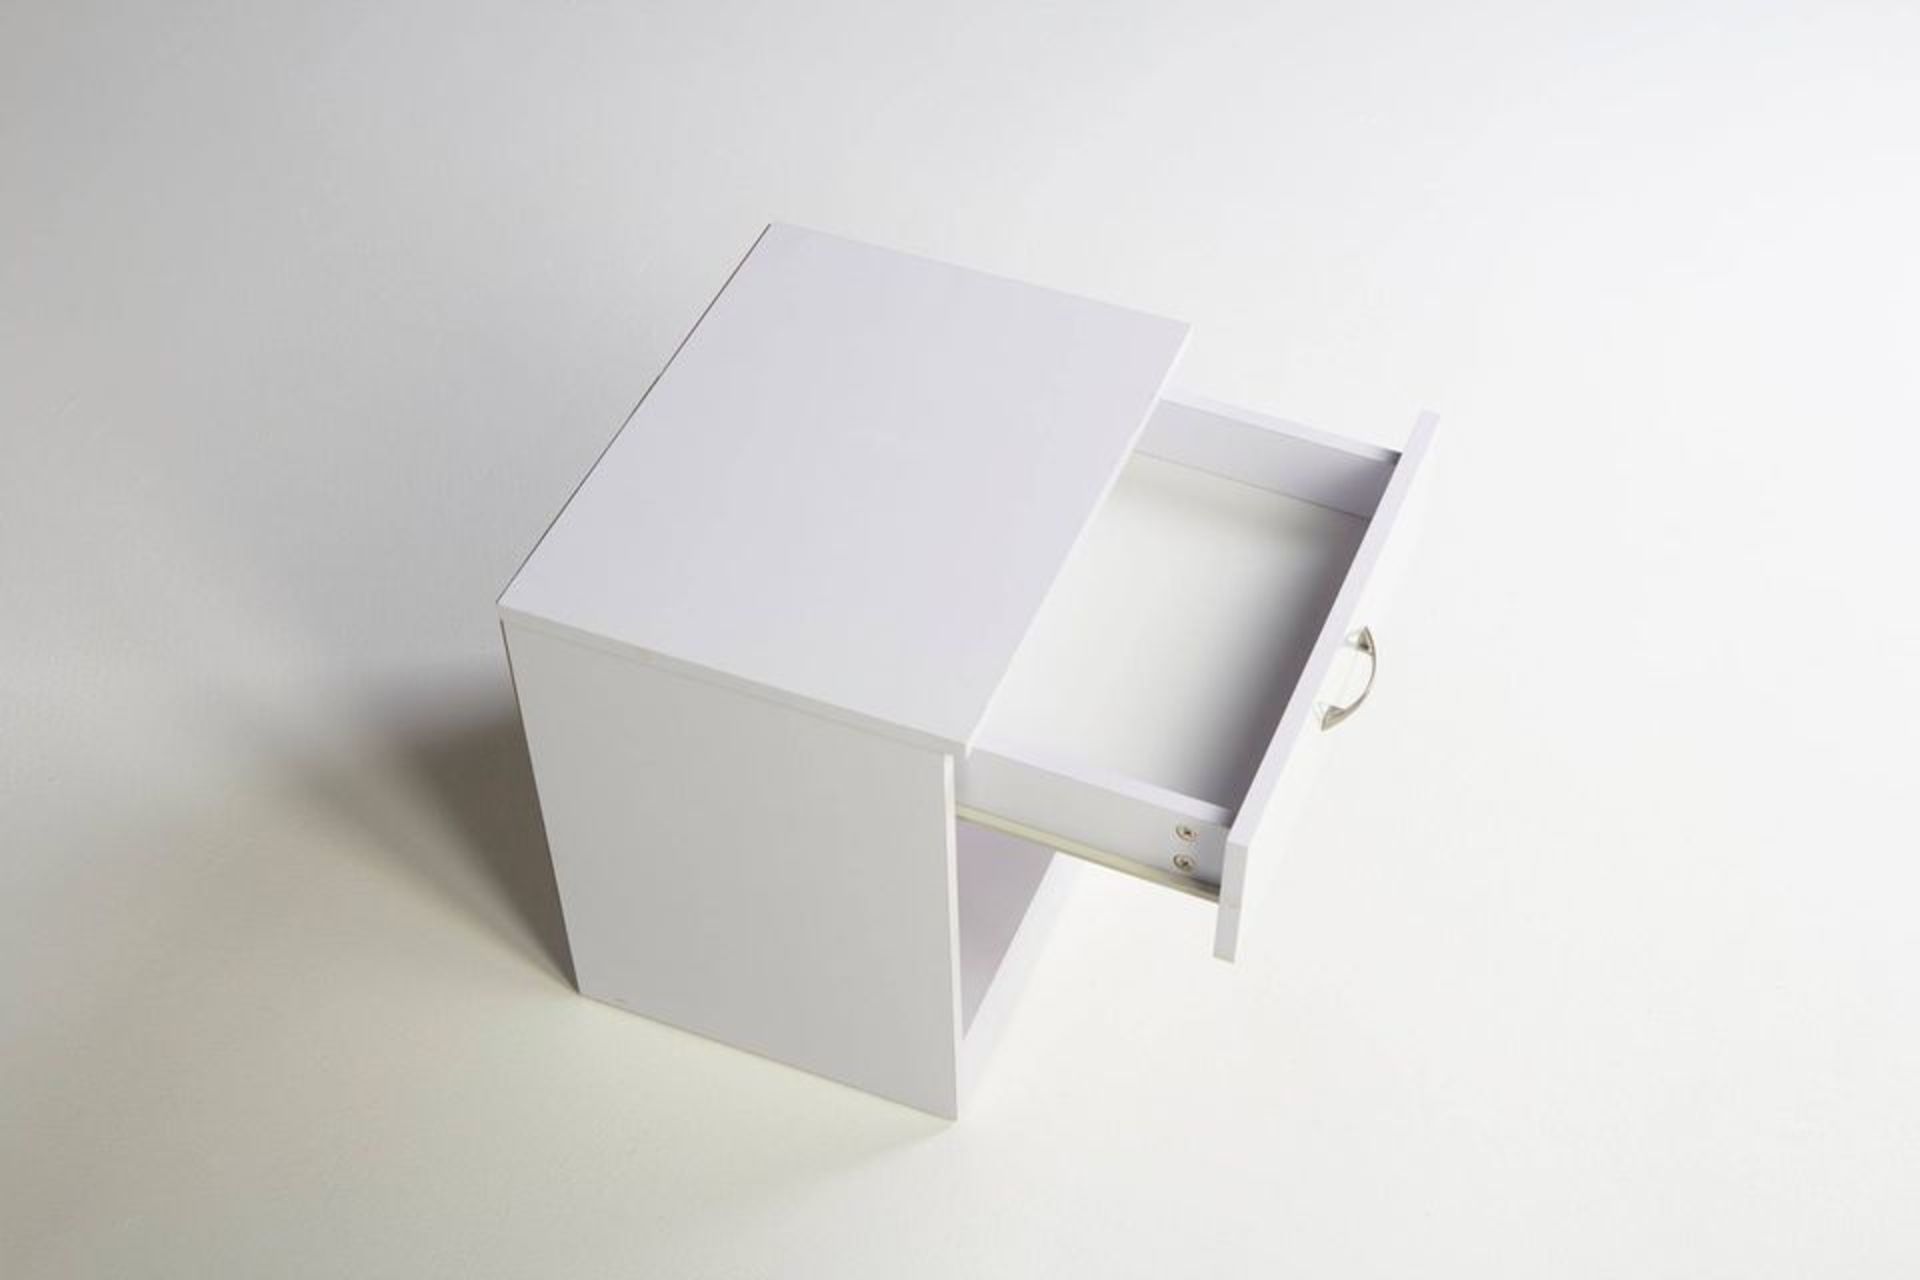 PAIR OF WHITE SINGLE DRAWER BEDSIDES WITH HIGH GLOSS DRAWER FRONTS - Image 4 of 4